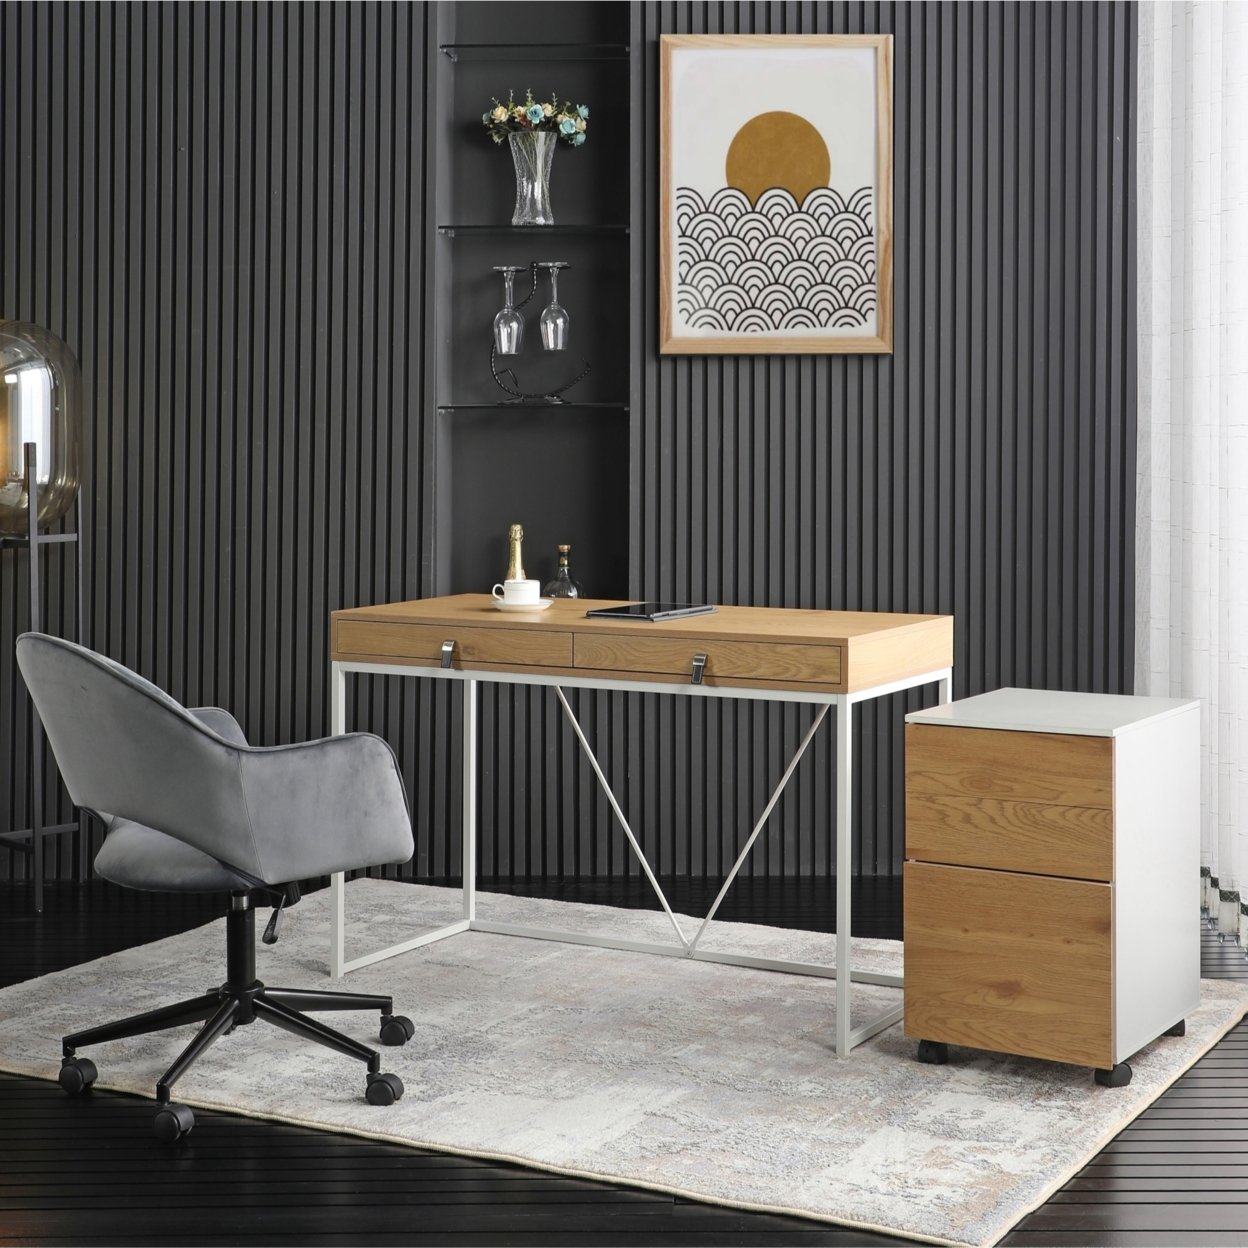 Aleyna Desk-2 Storage Drawers-Leather Drawer Handle-Powder Coated Steel Legs - natural/white